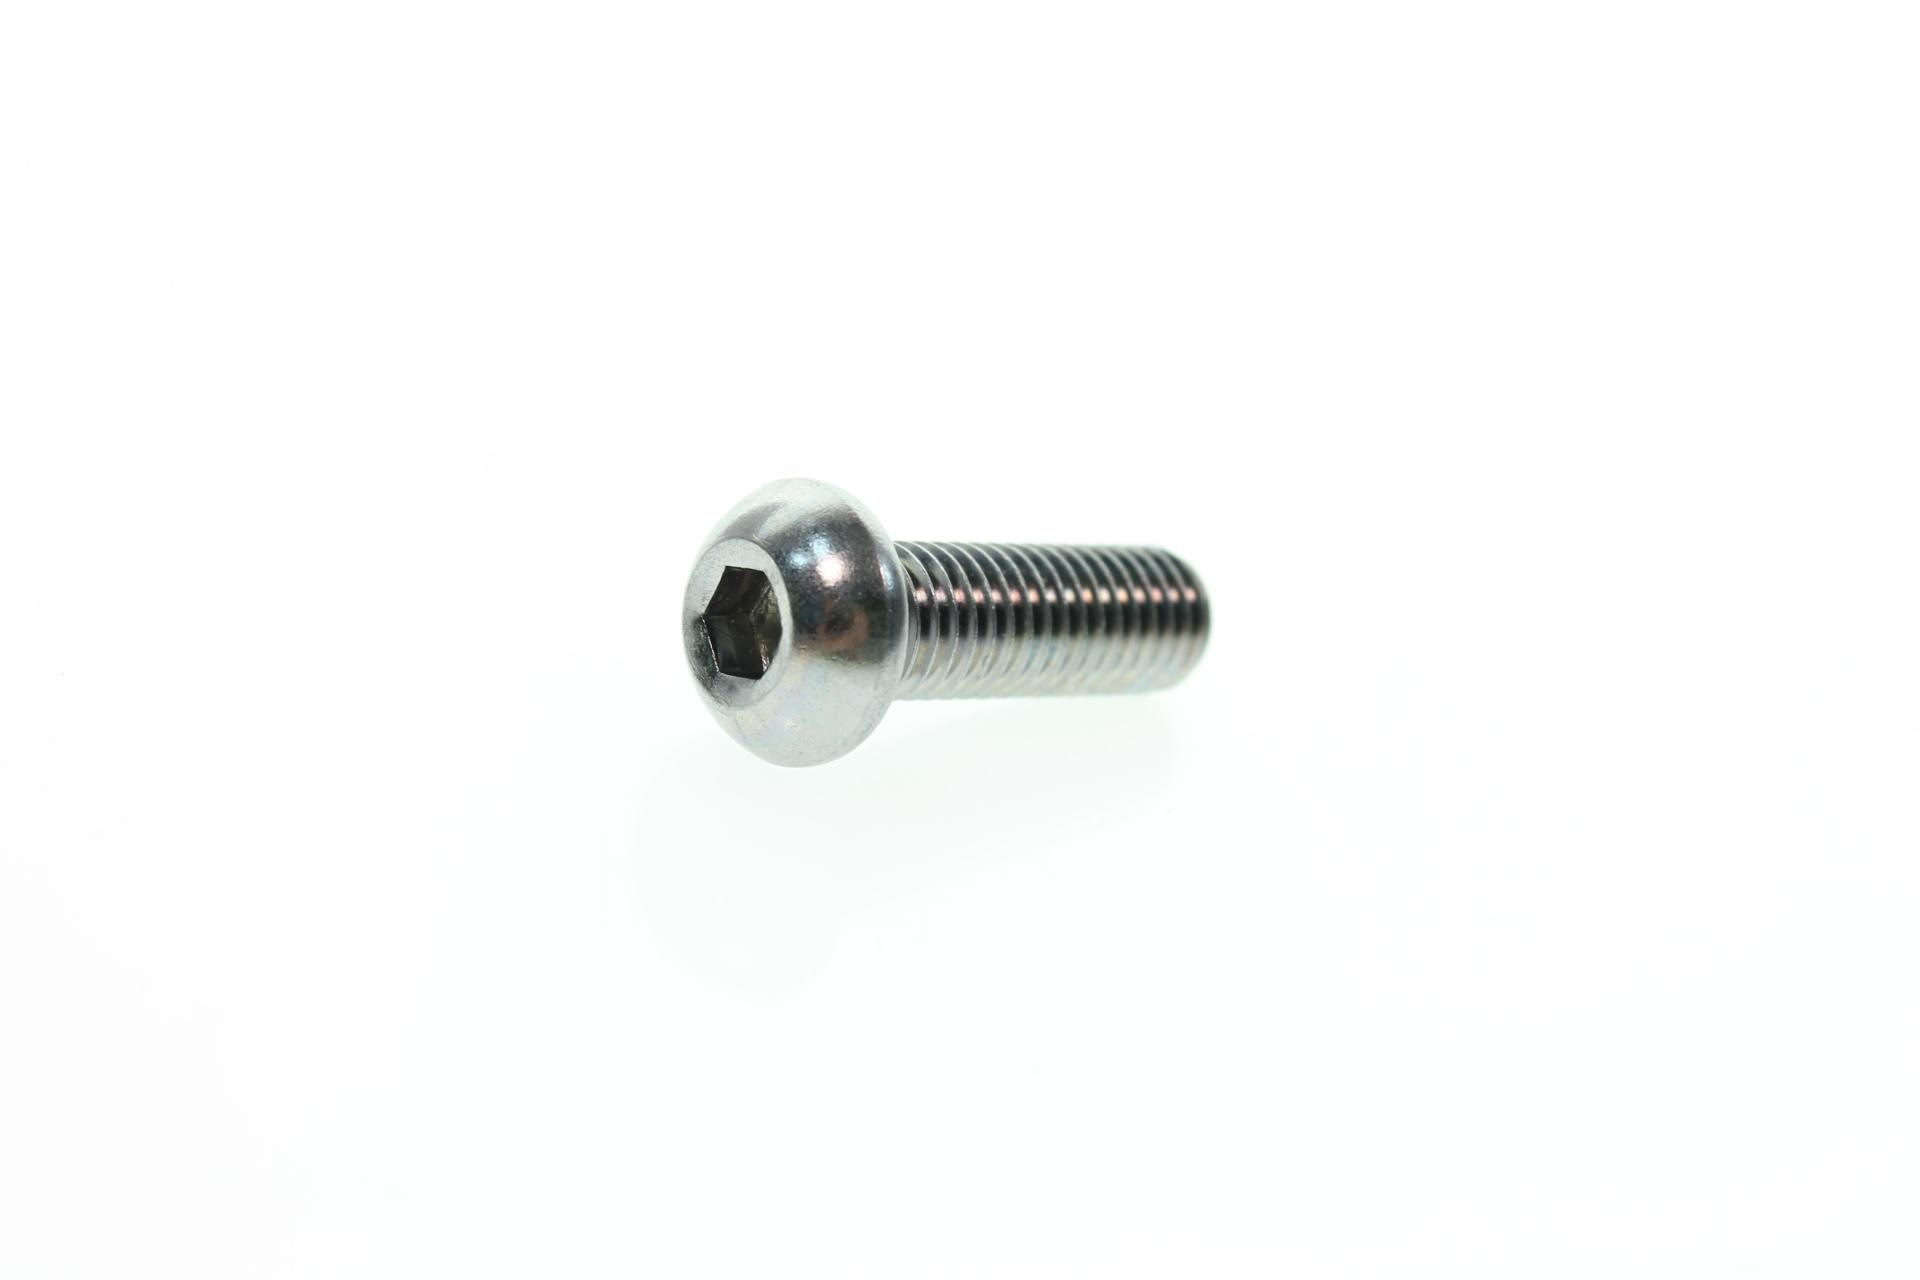 92011-08025-00 Superseded by 92014-08025-00 - BOLT, BUTTON HEAD